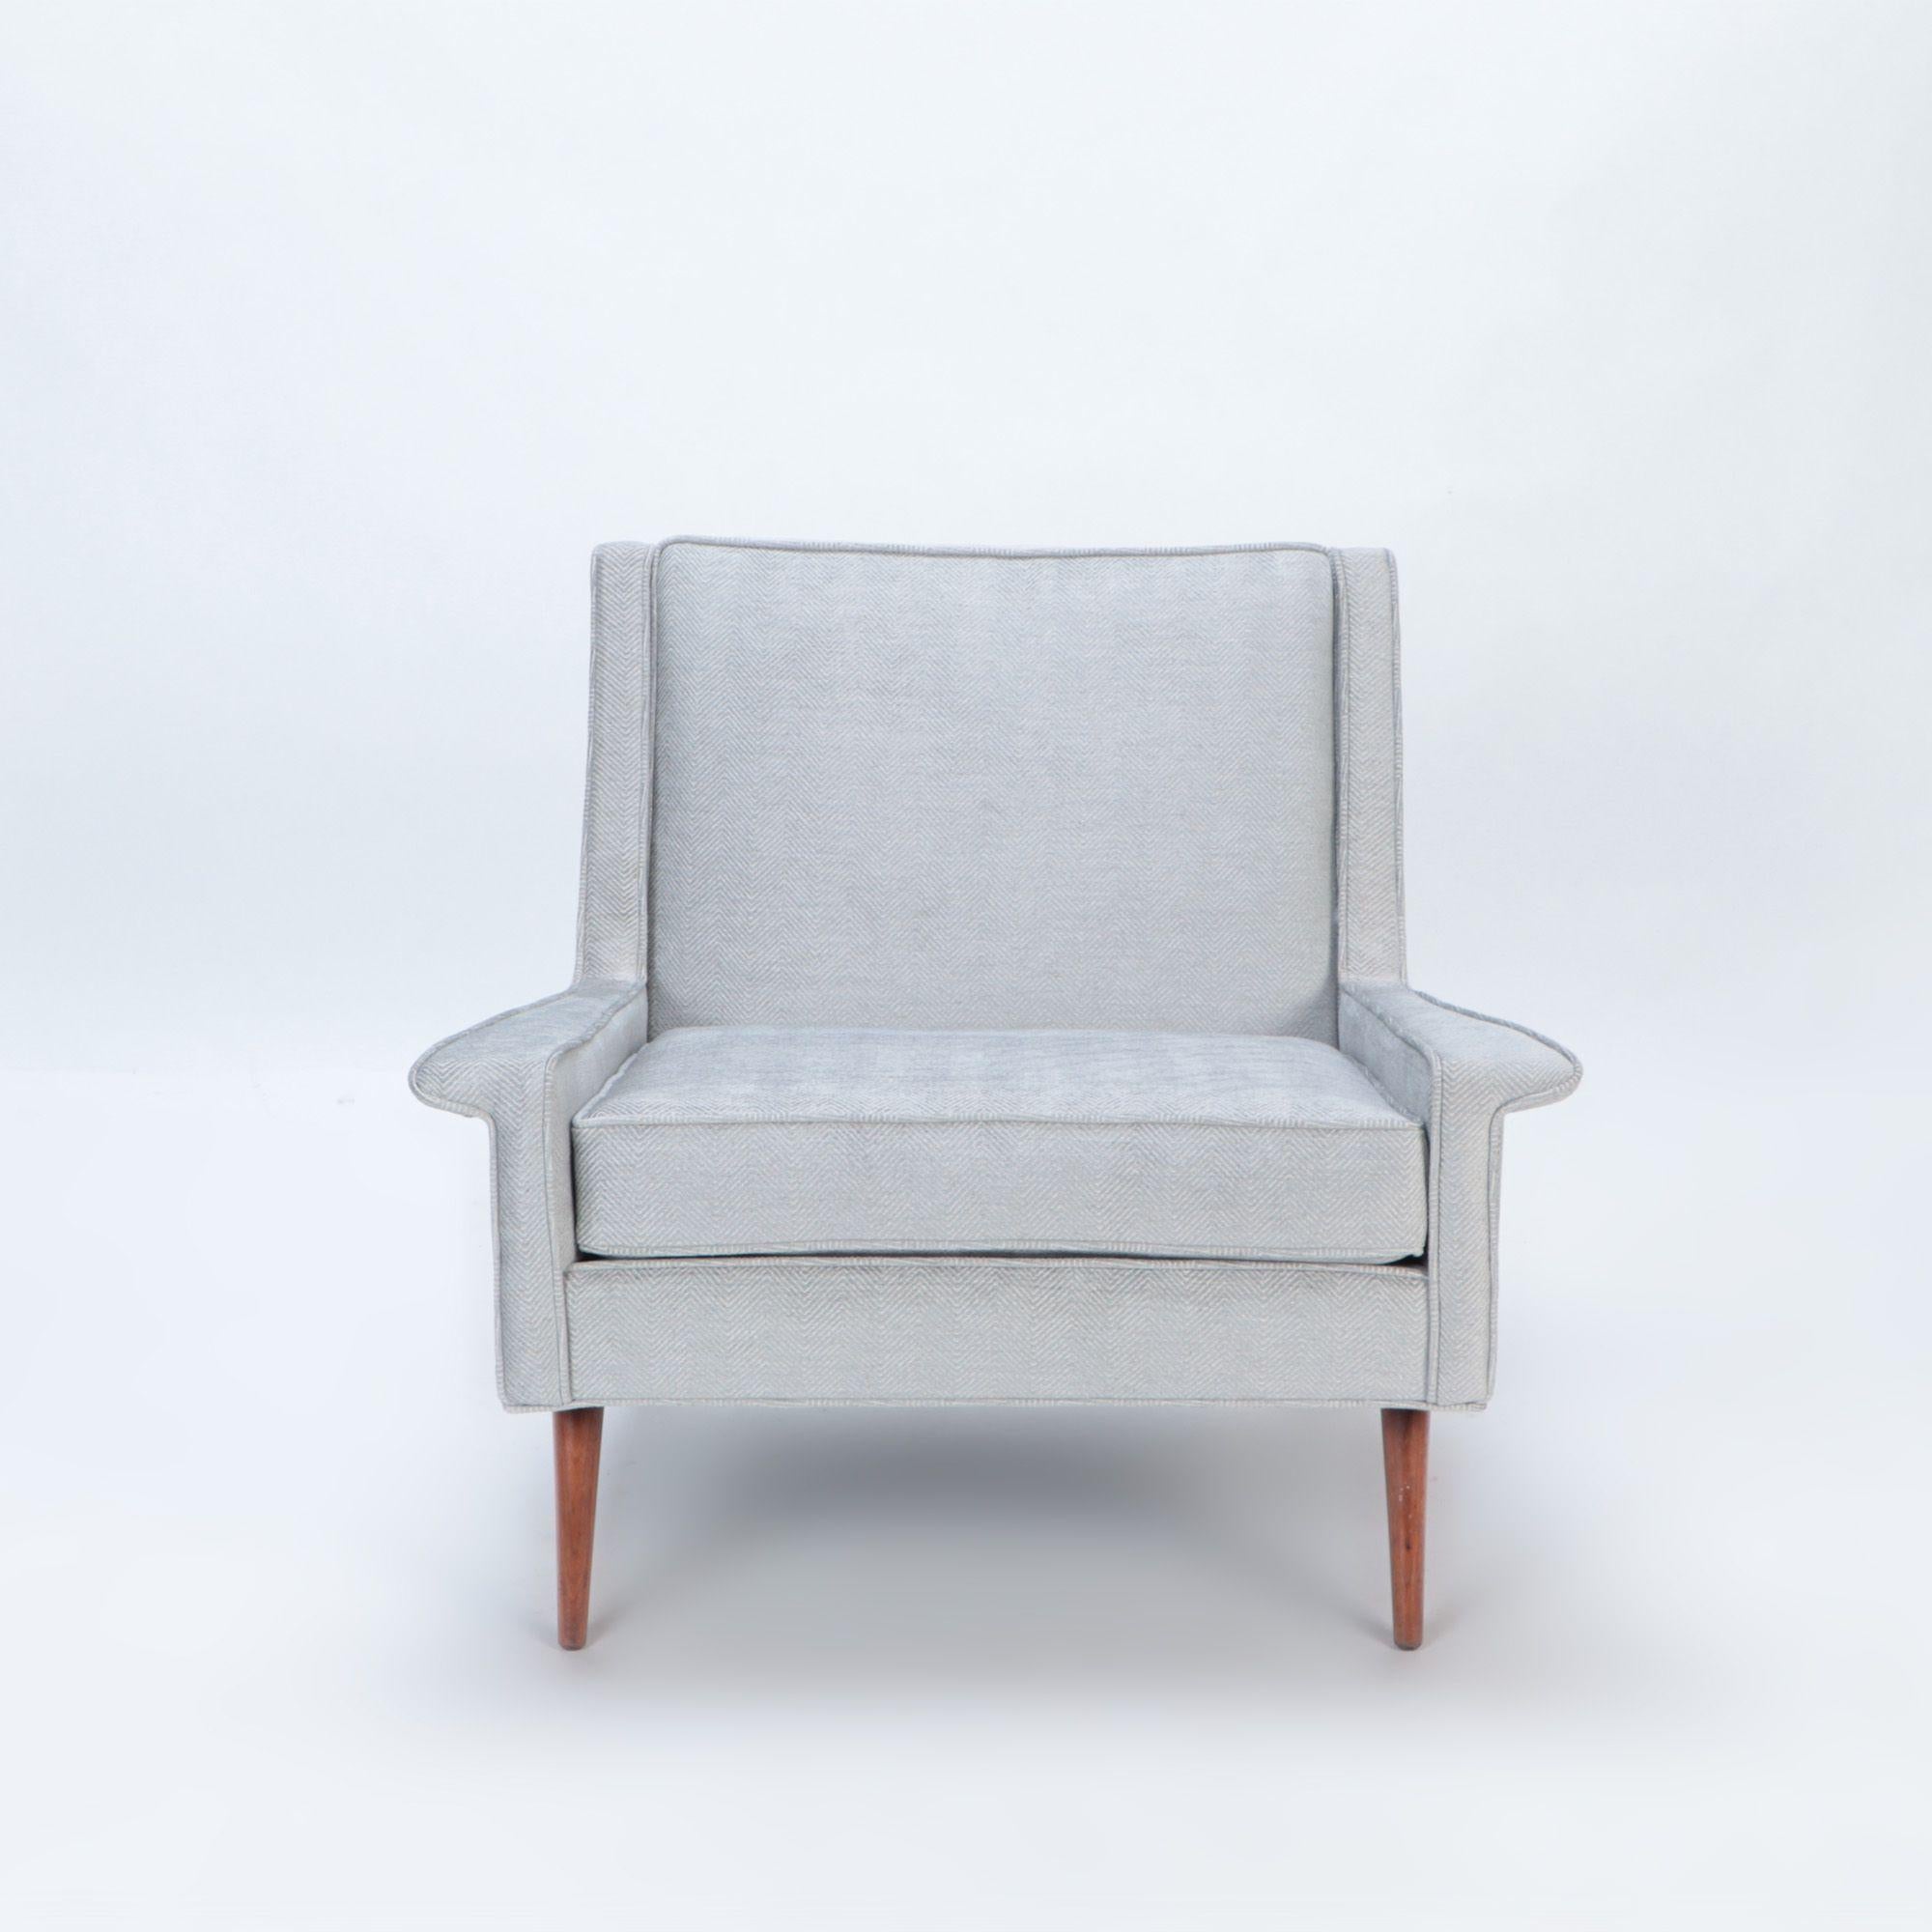 A Mid Century Modern newly upholstered lounge chair, in the style of Paul McCobb, circa 1950.